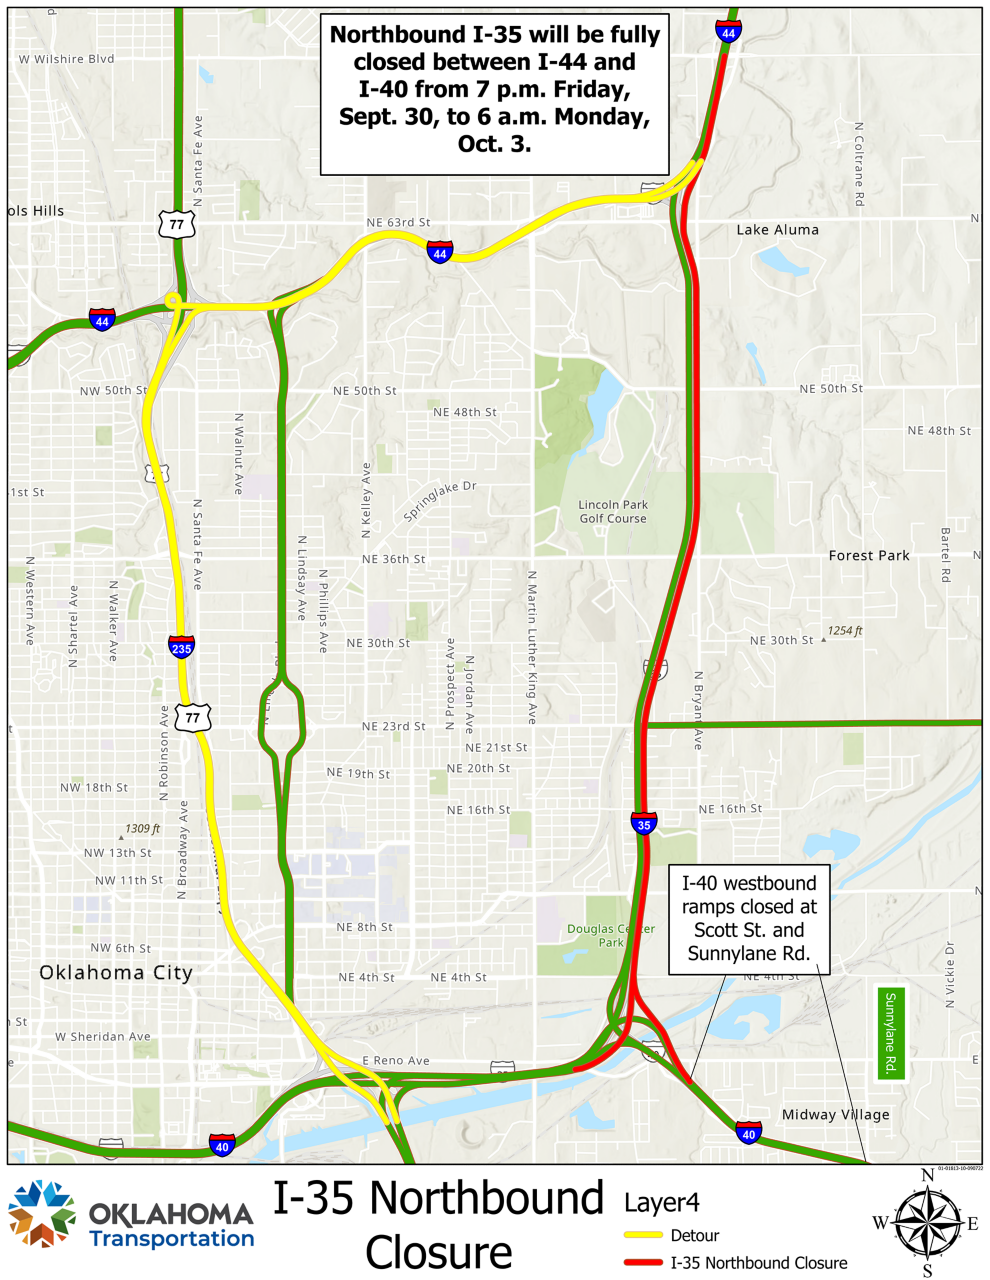 Northbound I-35 will be closed between I-40 and I-44 from 7 p.m. Sept. 30 to 6 a.m. Oct. 3 for resurfacing.